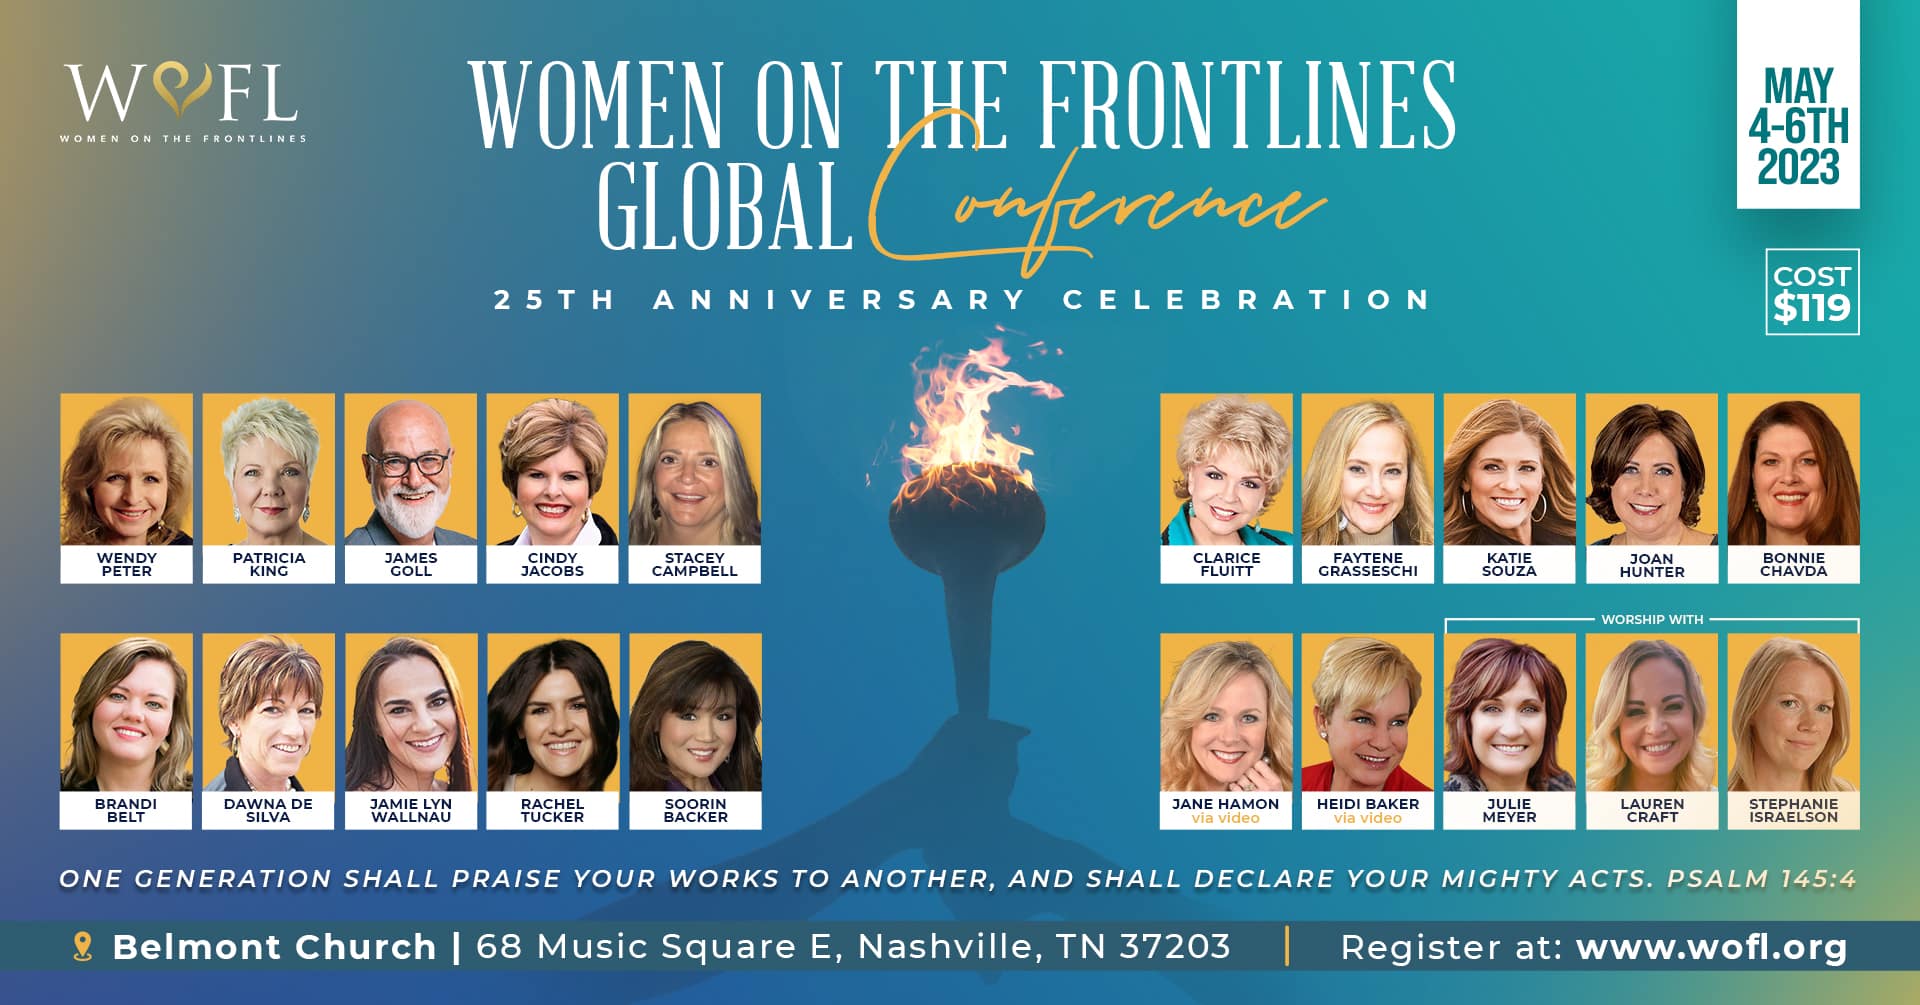 Women on the Frontlines Global Conference May 4-6 2023